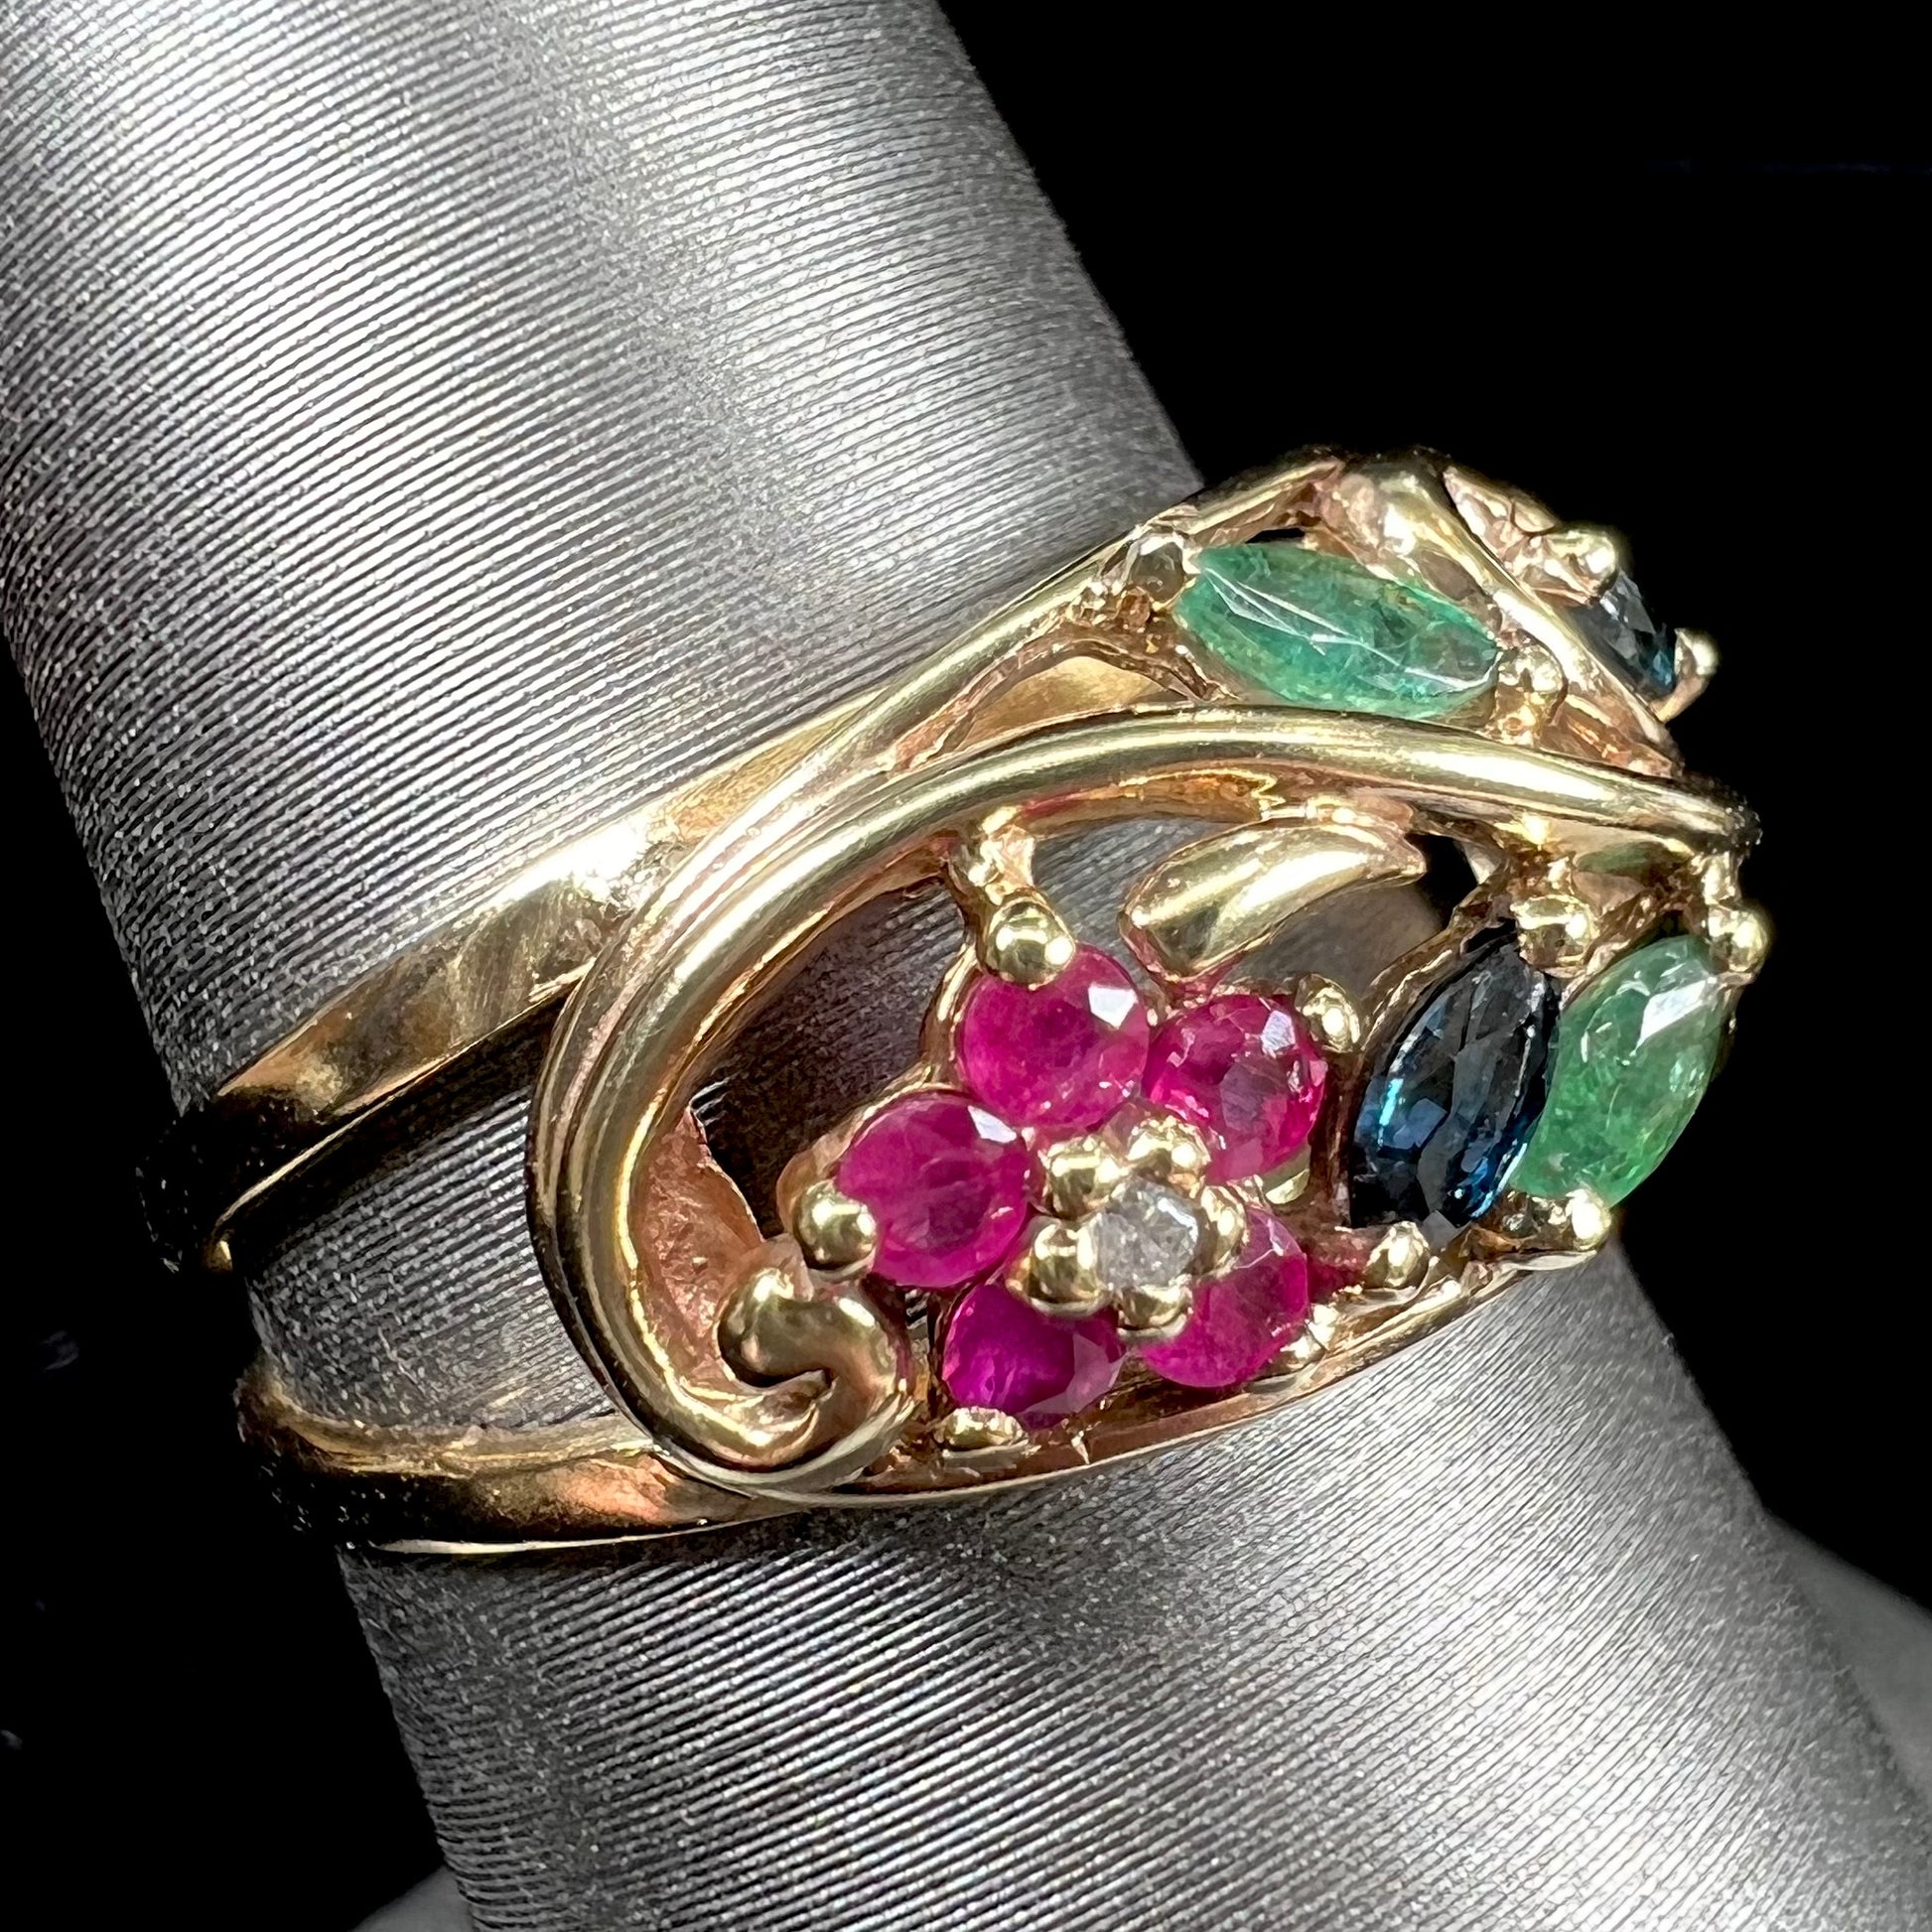 A yellow gold ladies' ring featuring the motif of a flower with leaves set with emeralds, rubies, sapphires, and a  diamond.